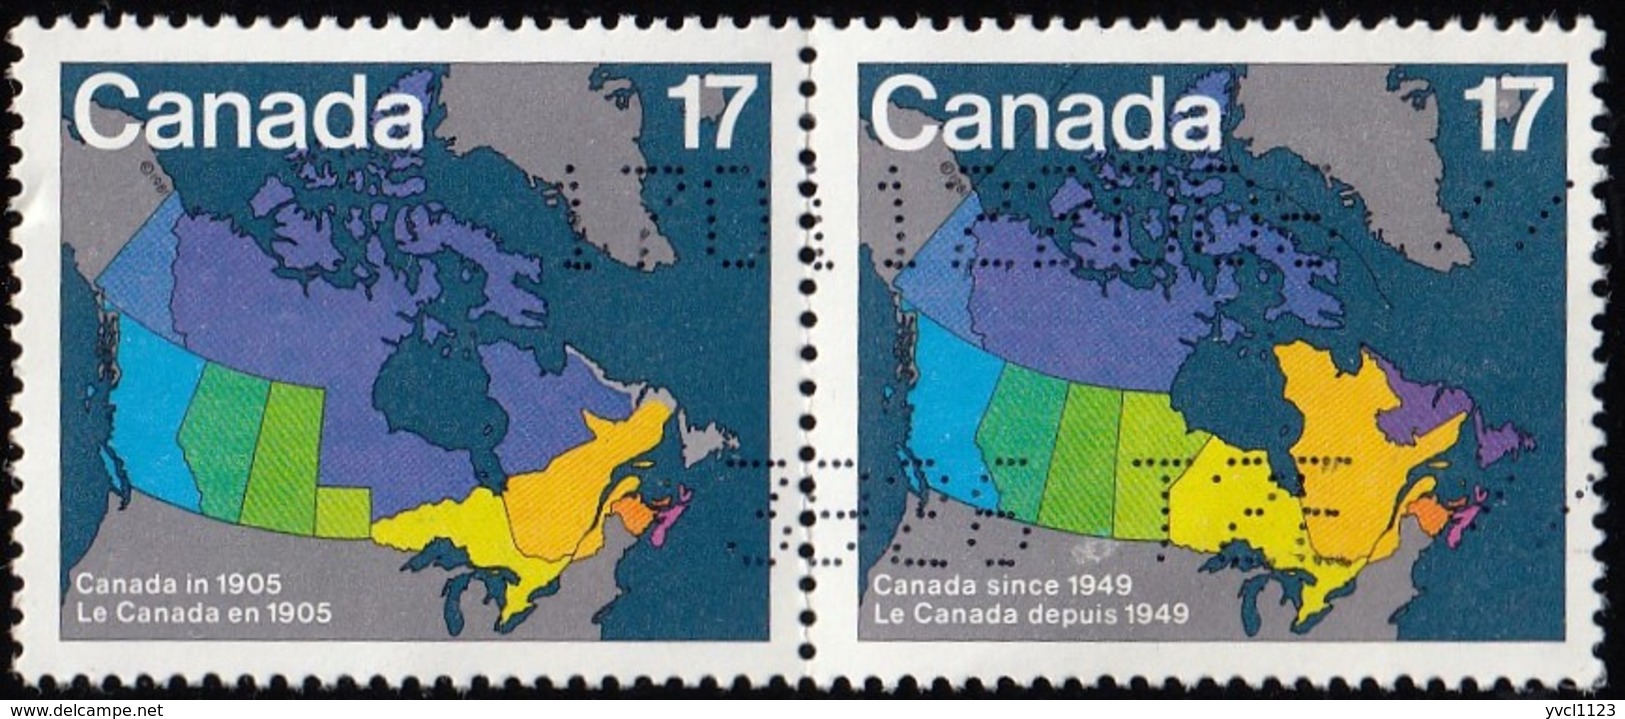 CANADA - Scott #892-893 Map Showing Evolution Of Canada, 1905 And 1949 / Used Stamp - Usati